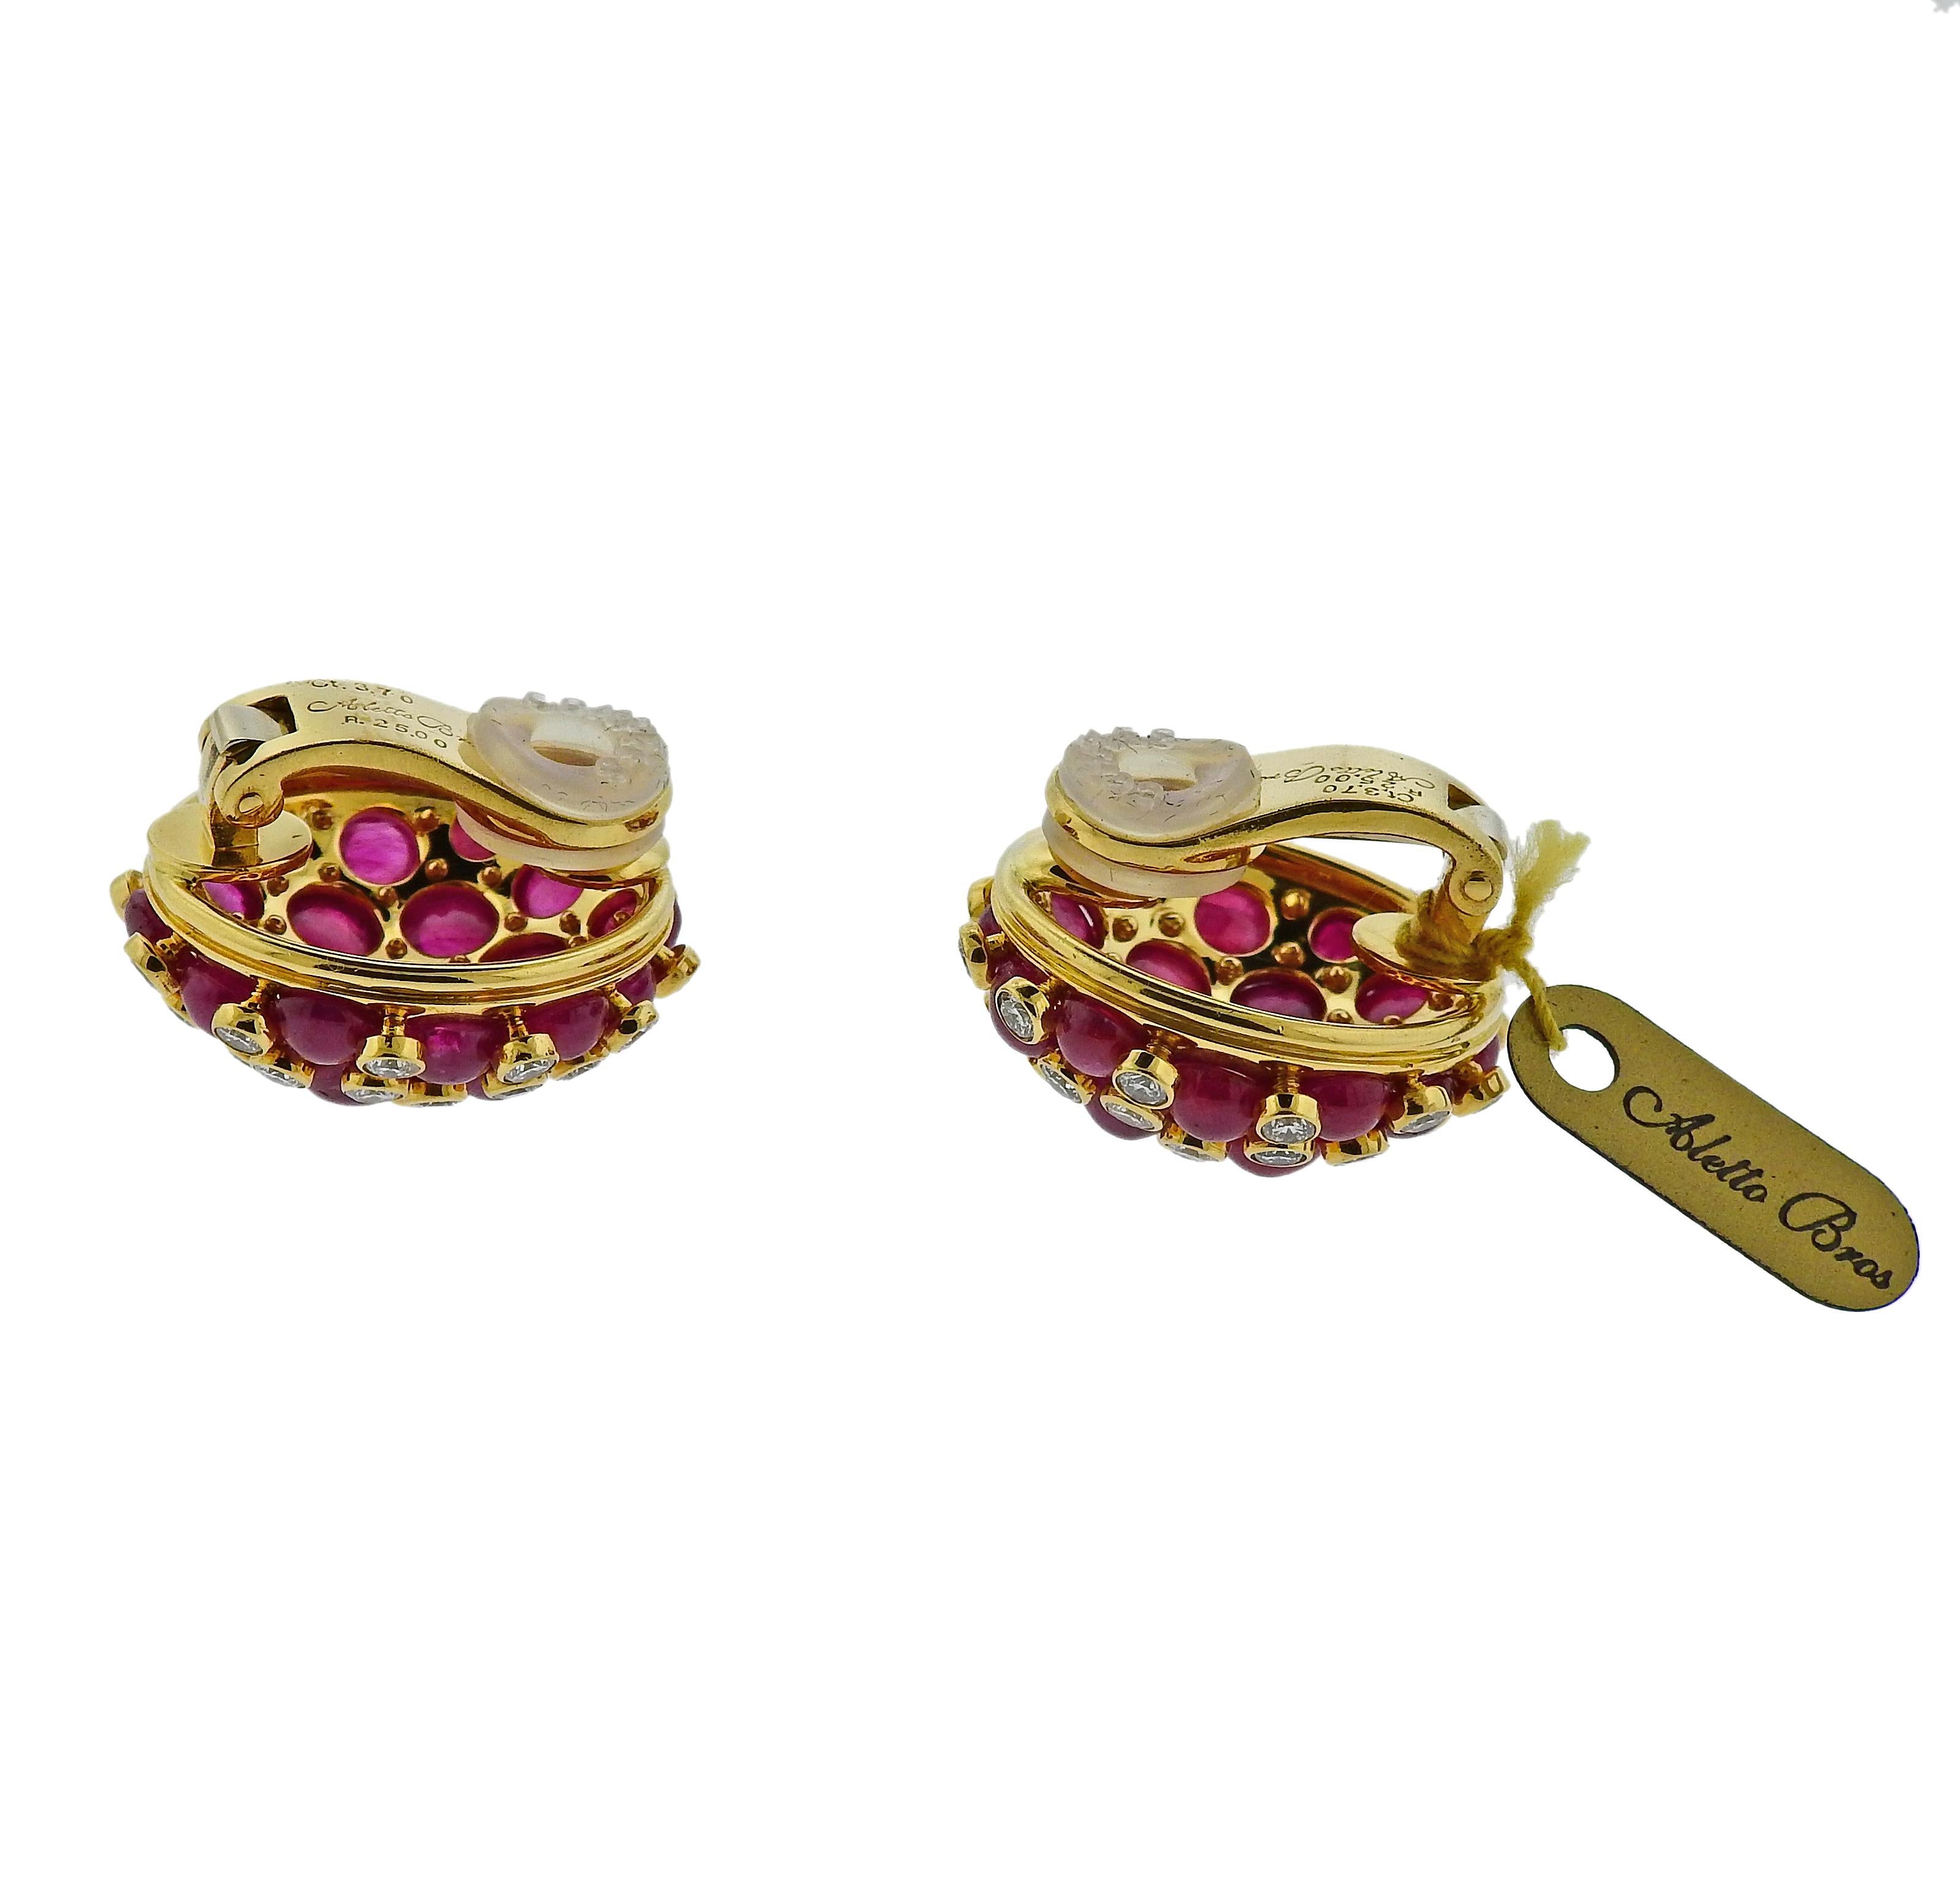 Pair of new 18k yellow gold earrings by Aletto Brothers, featuring 25 carats in ruby cabochons, and 3.70ctw in VVS/VS-G diamonds.  Earrings are 24mm in diameter. Weigh 28.9 grams. Marked: USA,750, Ct.3.70,R25.00, Aletto Bros.